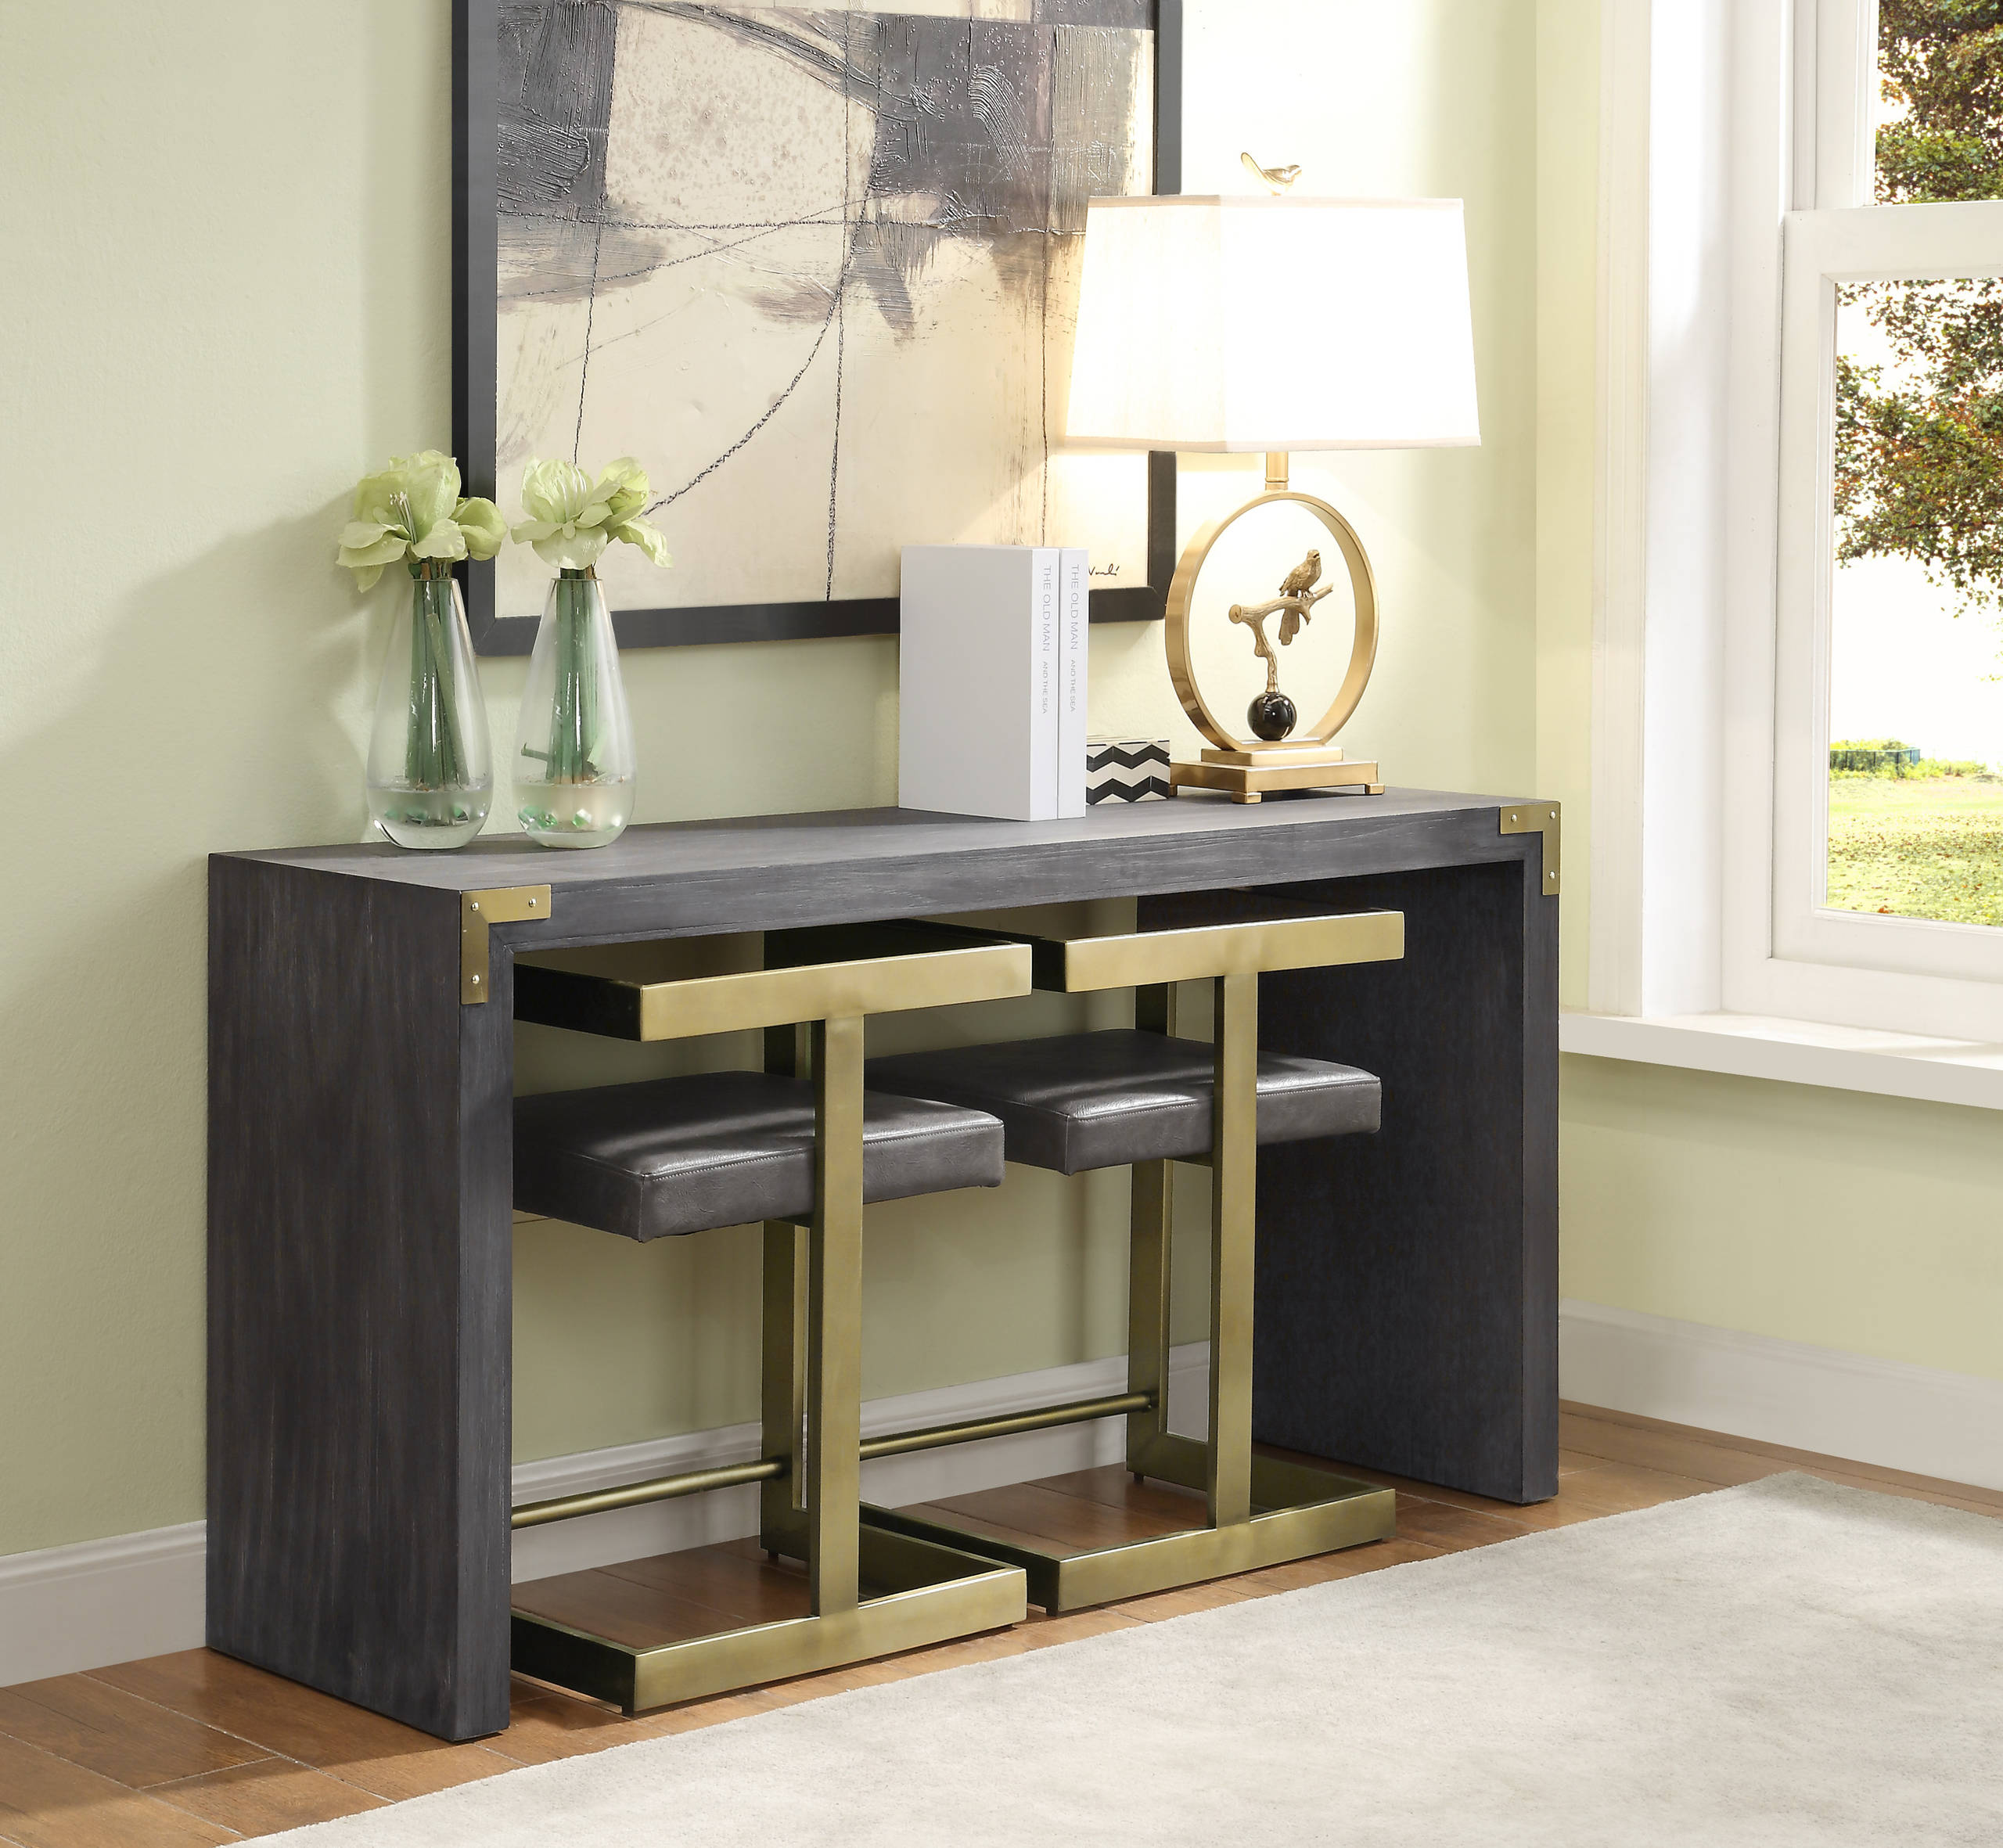 Console Table With Stool Ideas Photos, Metal Sofa Table With Stools